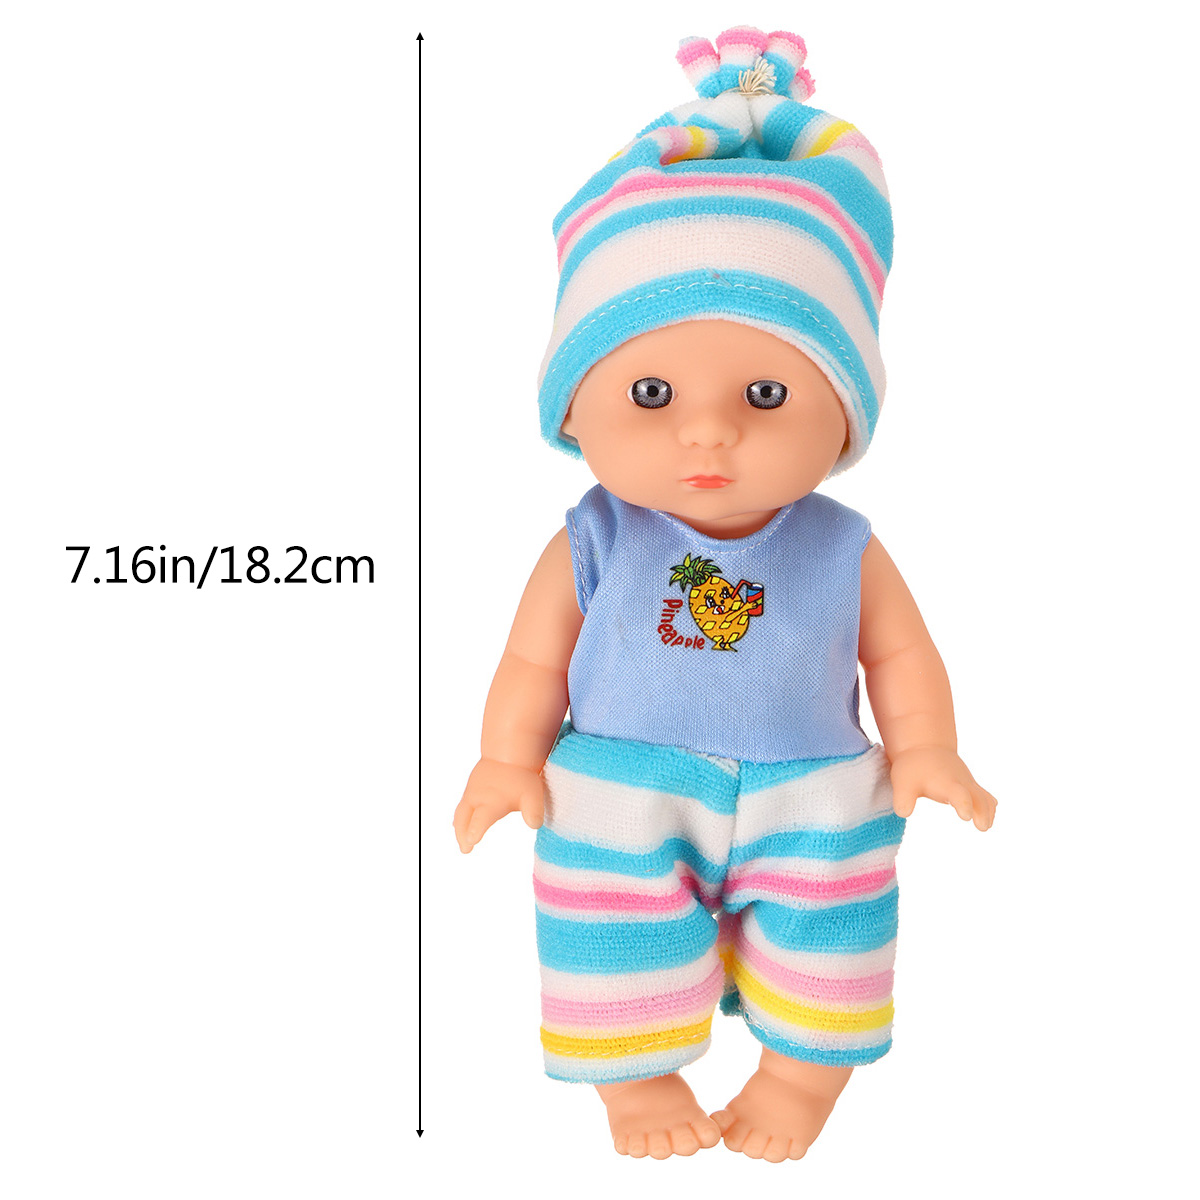 Simulation-Baby-3D-Creative-Cute-Doll-Play-House-Toy-Doll-Vinyl-Doll-Gift-1818655-23